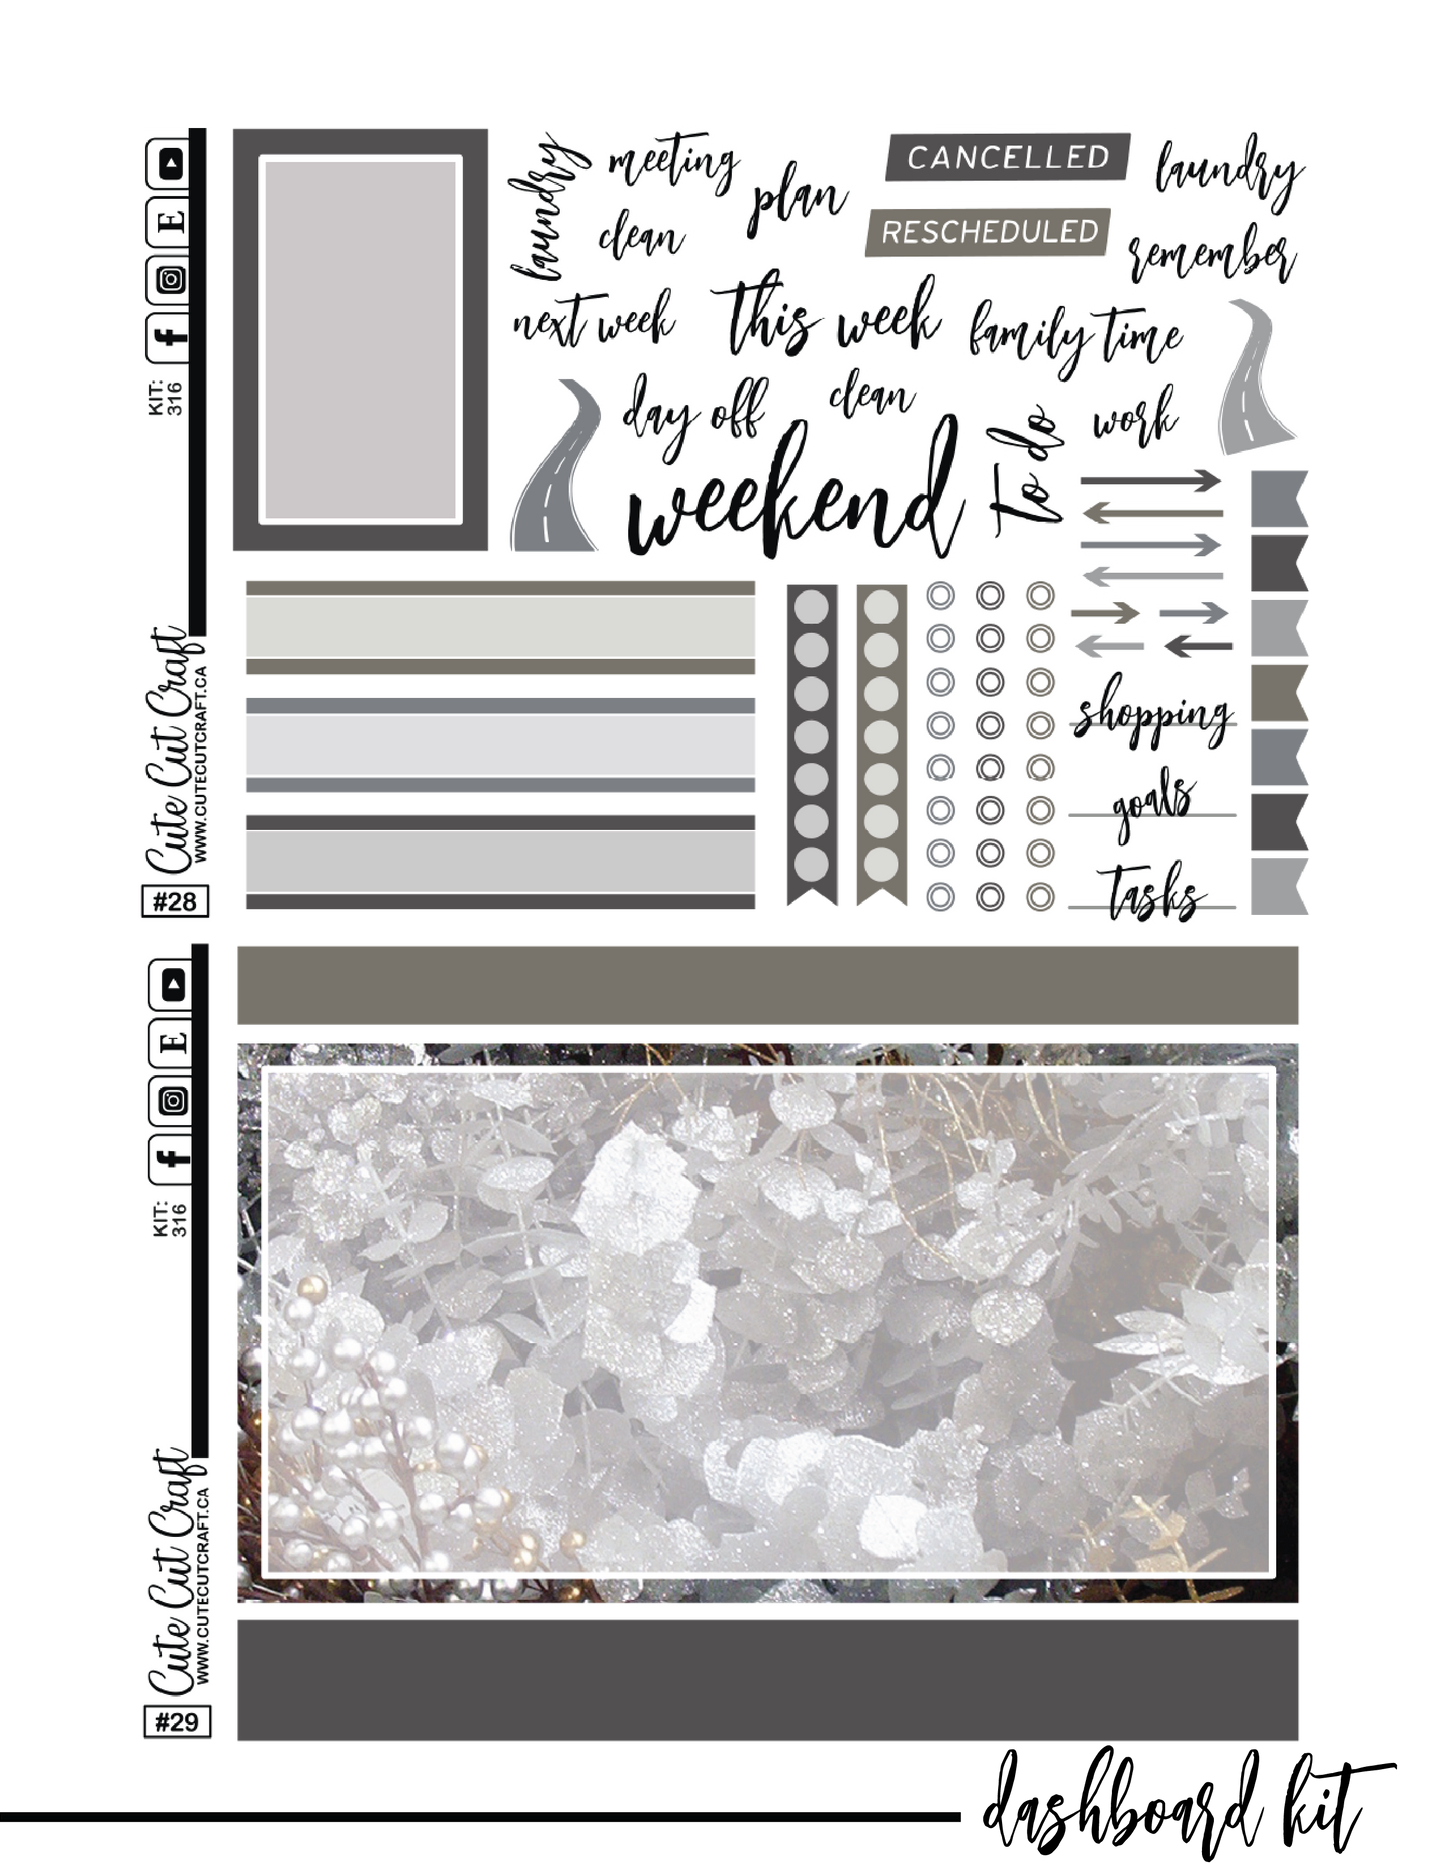 Silver Christmas #316 || Complete Collection [PRINTABLE]